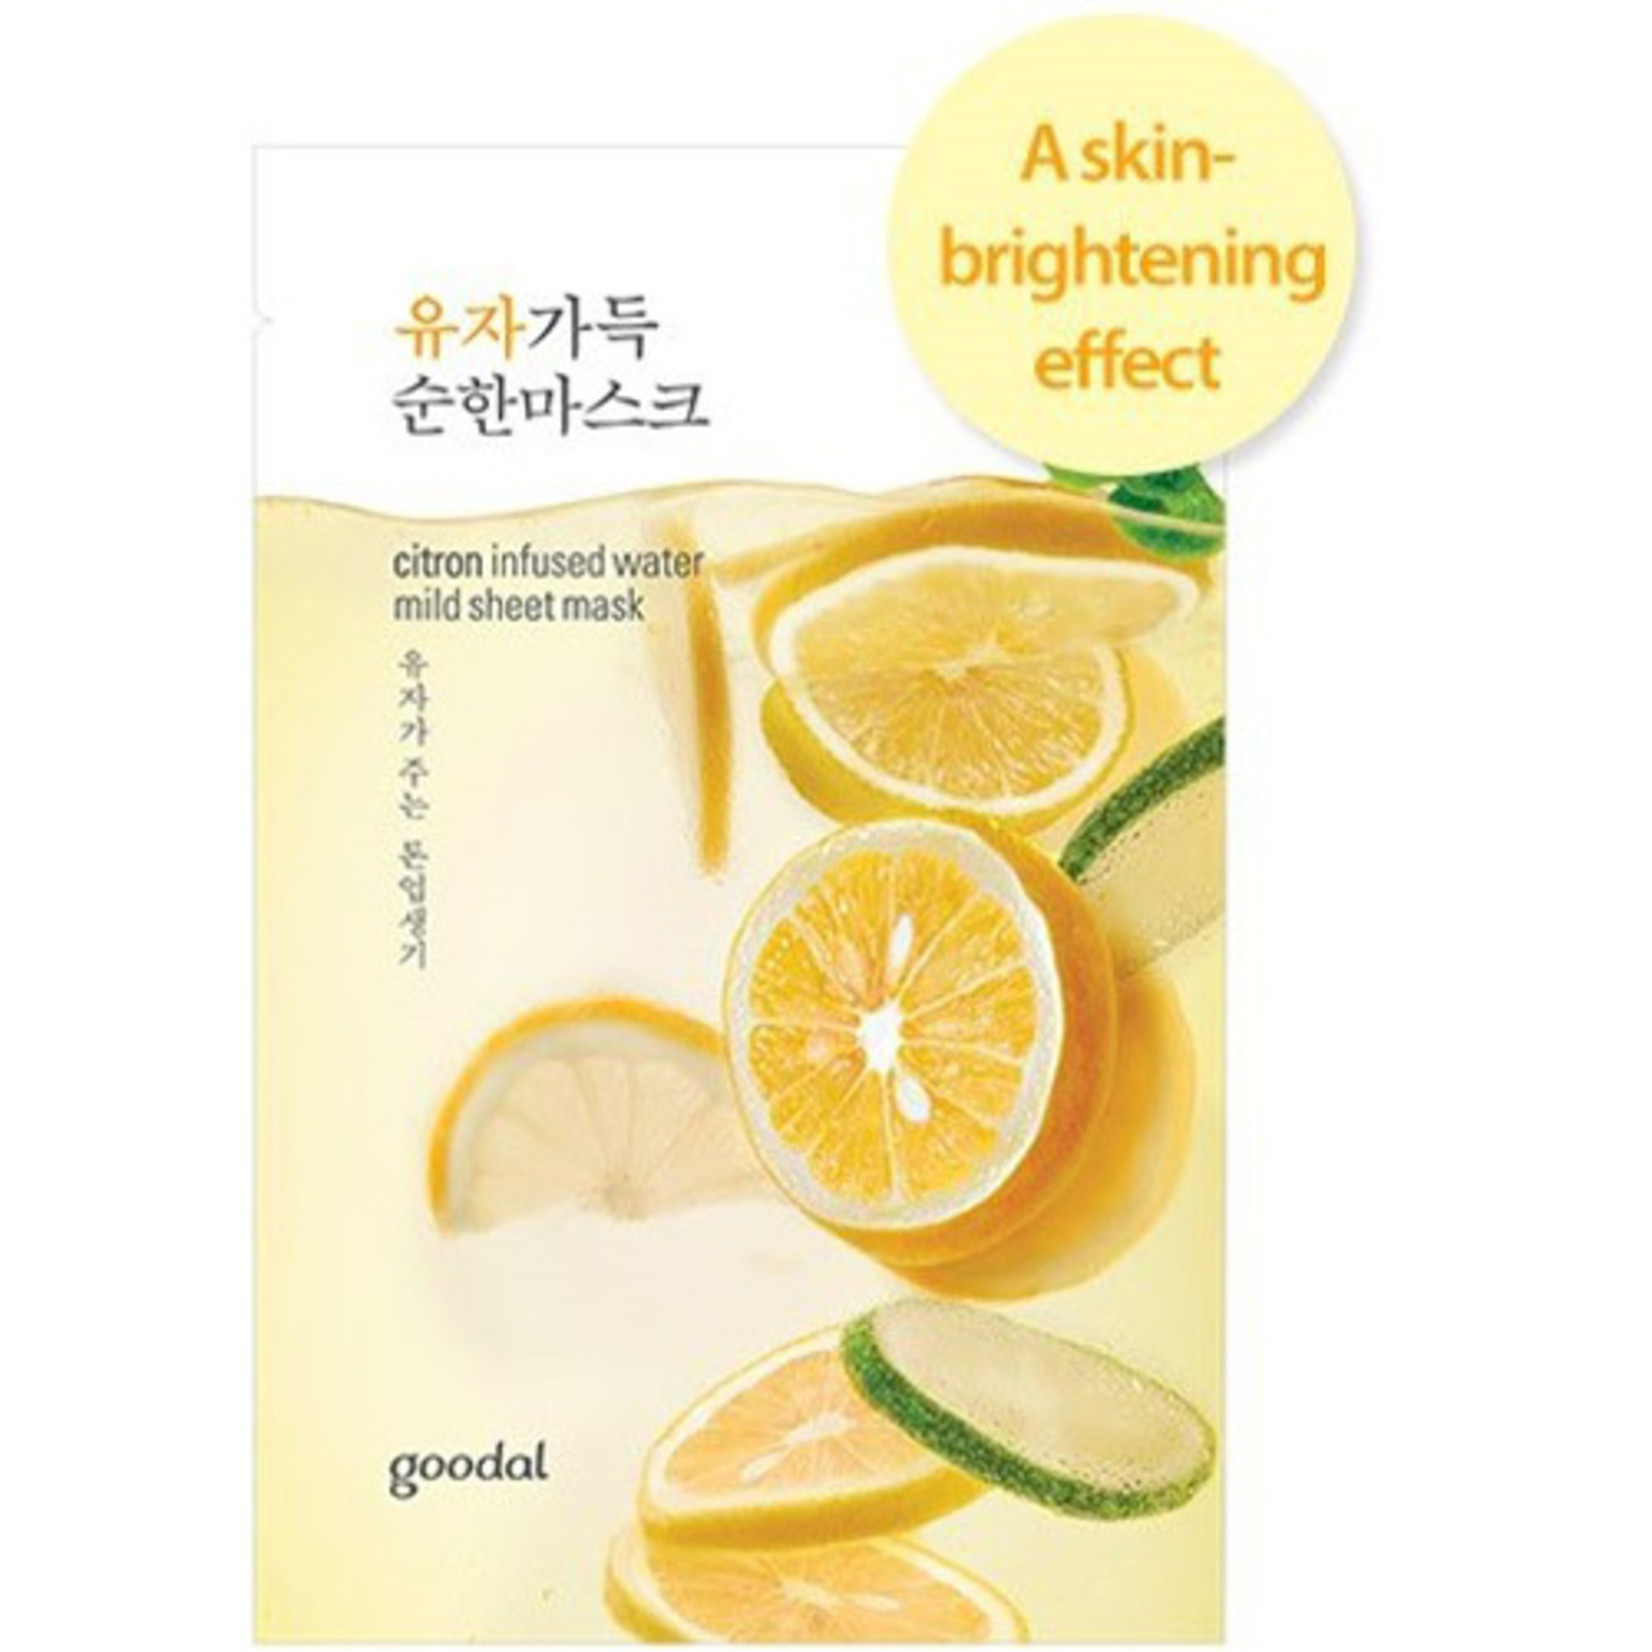 citron infused water mild sheet mask